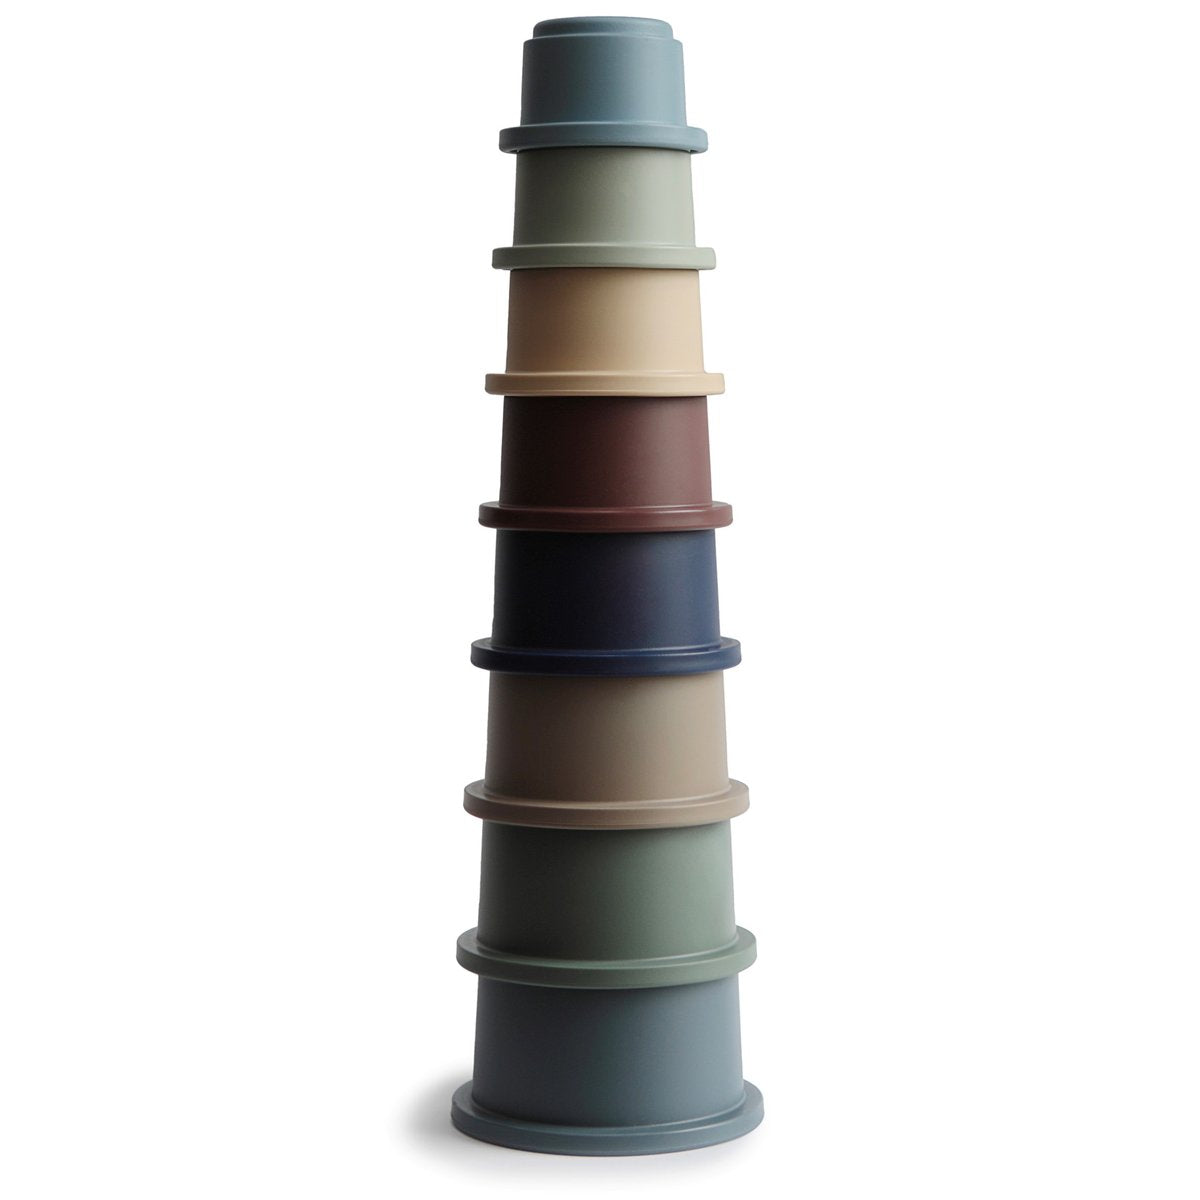 Danish Hygge Stacking Cups - Woodland Green